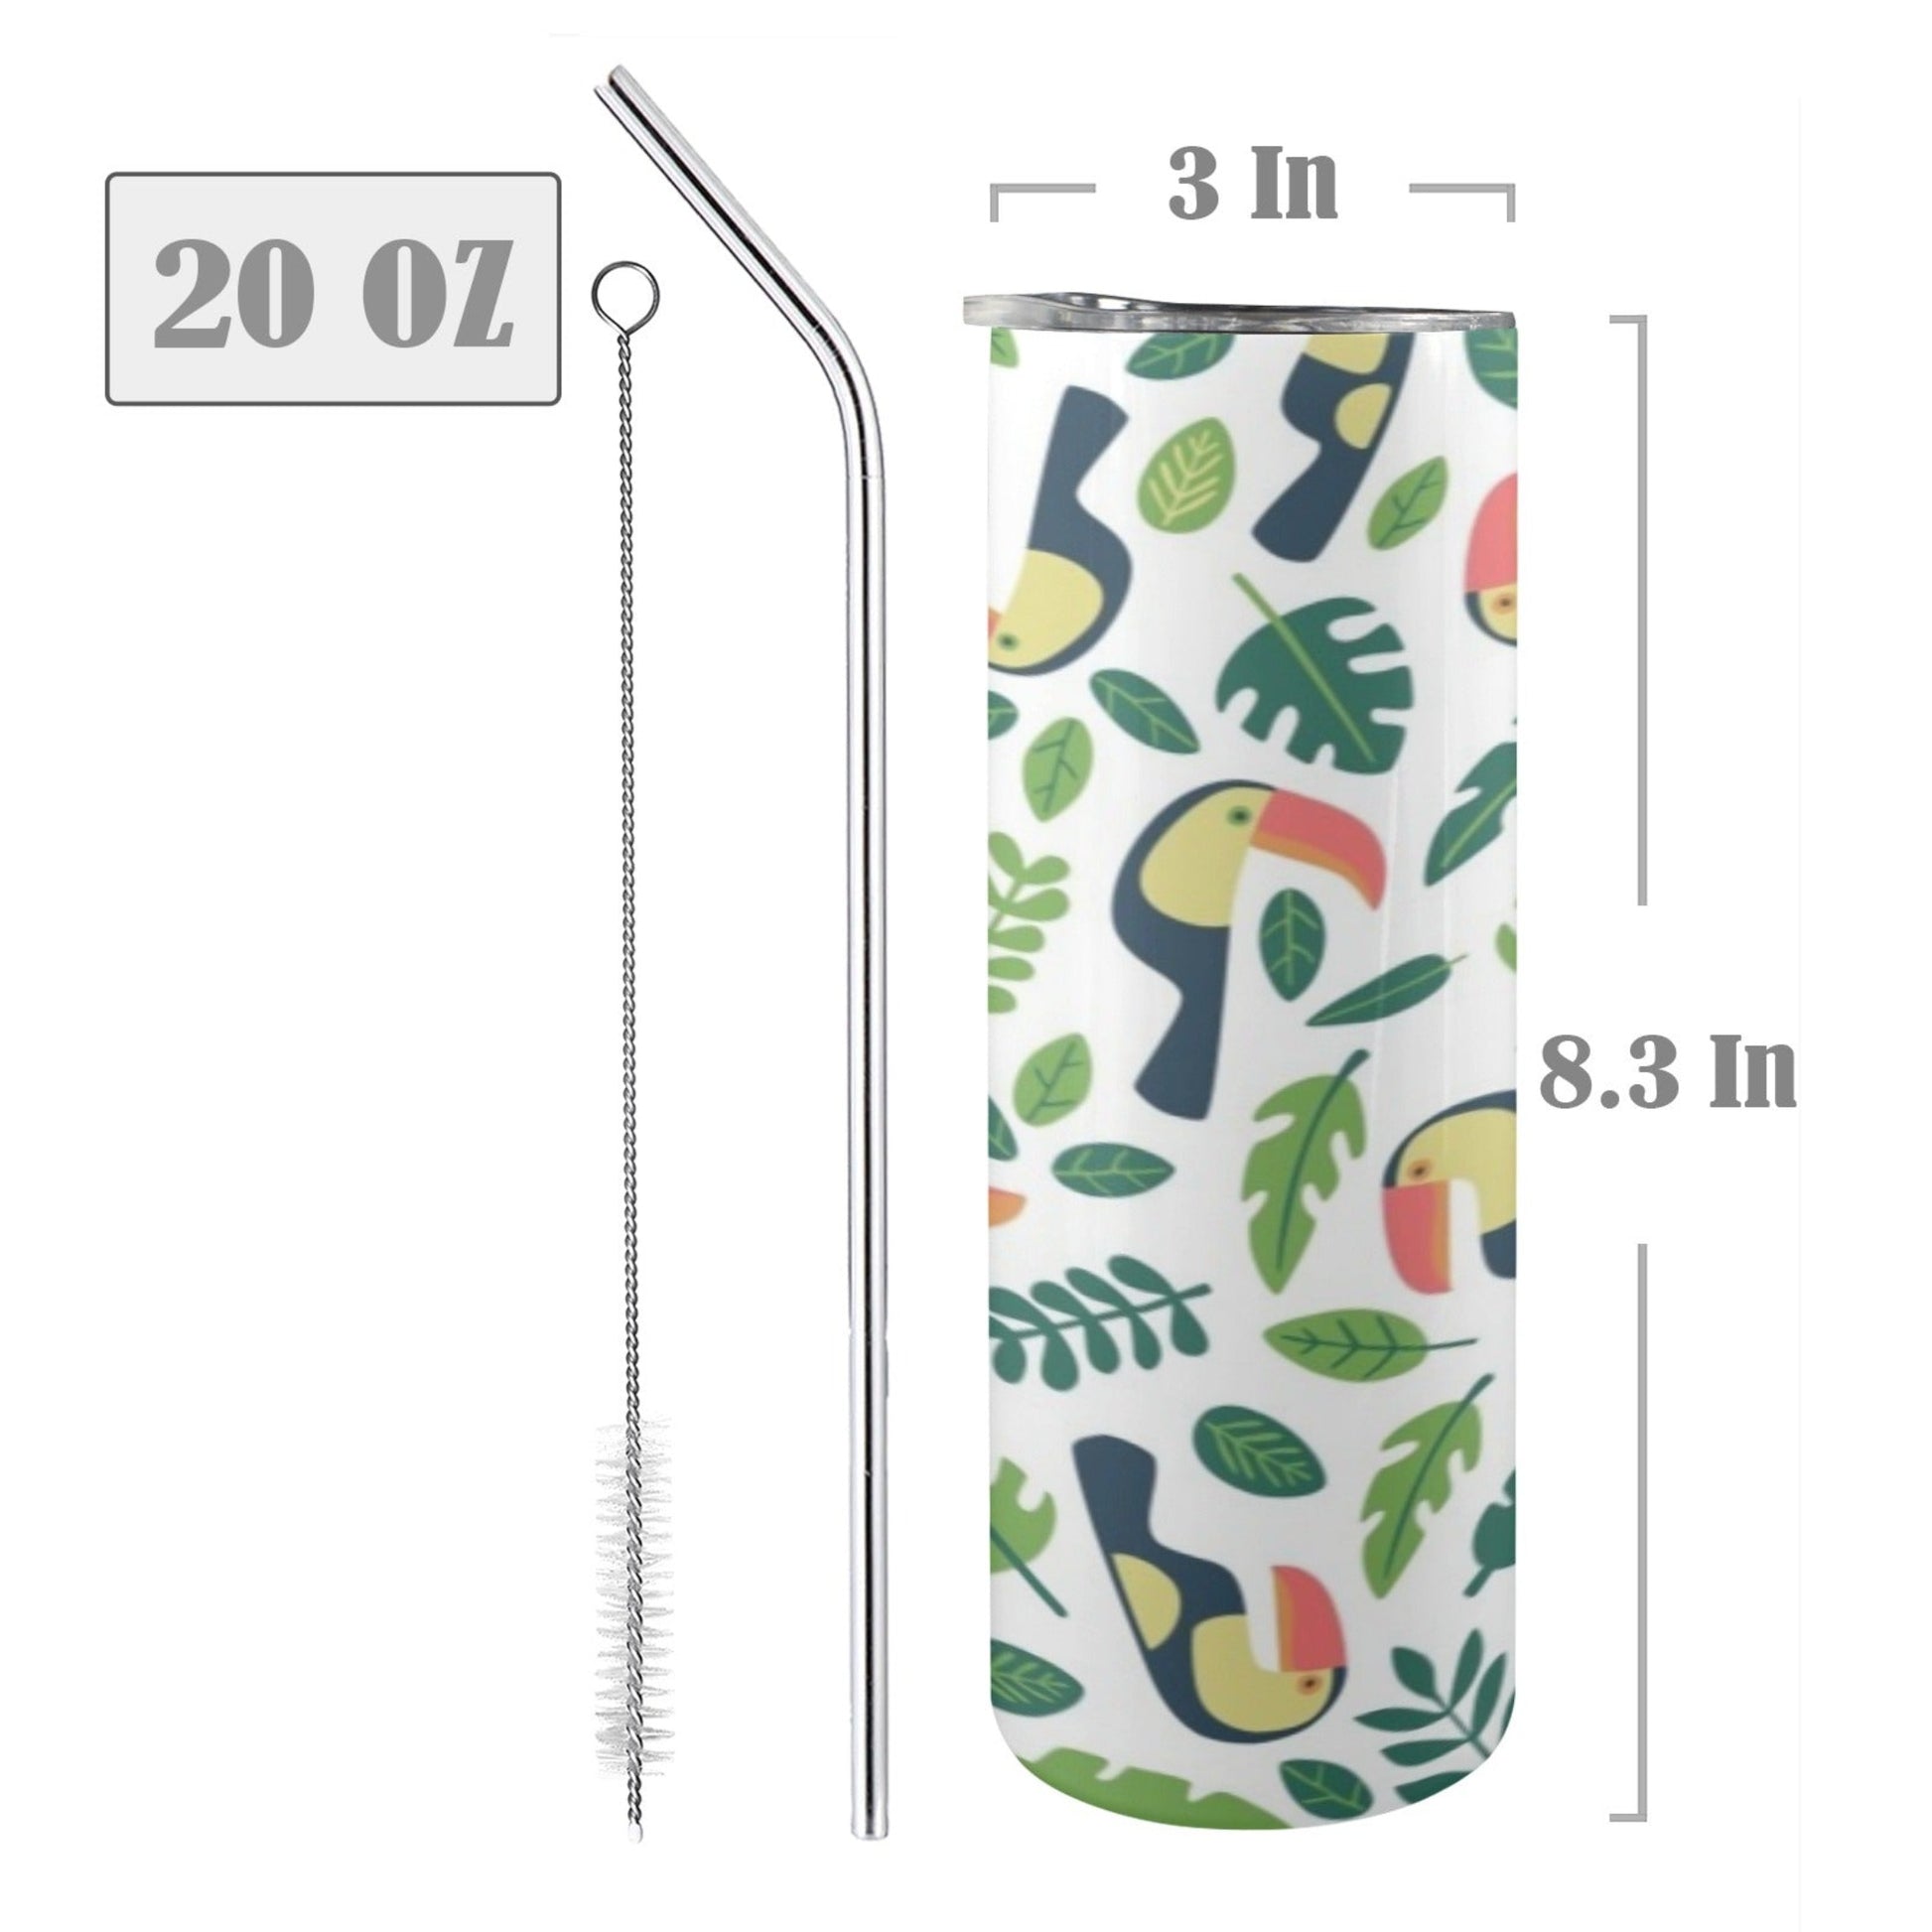 Toucans - 20oz Tall Skinny Tumbler with Lid and Straw 20oz Tall Skinny Tumbler with Lid and Straw